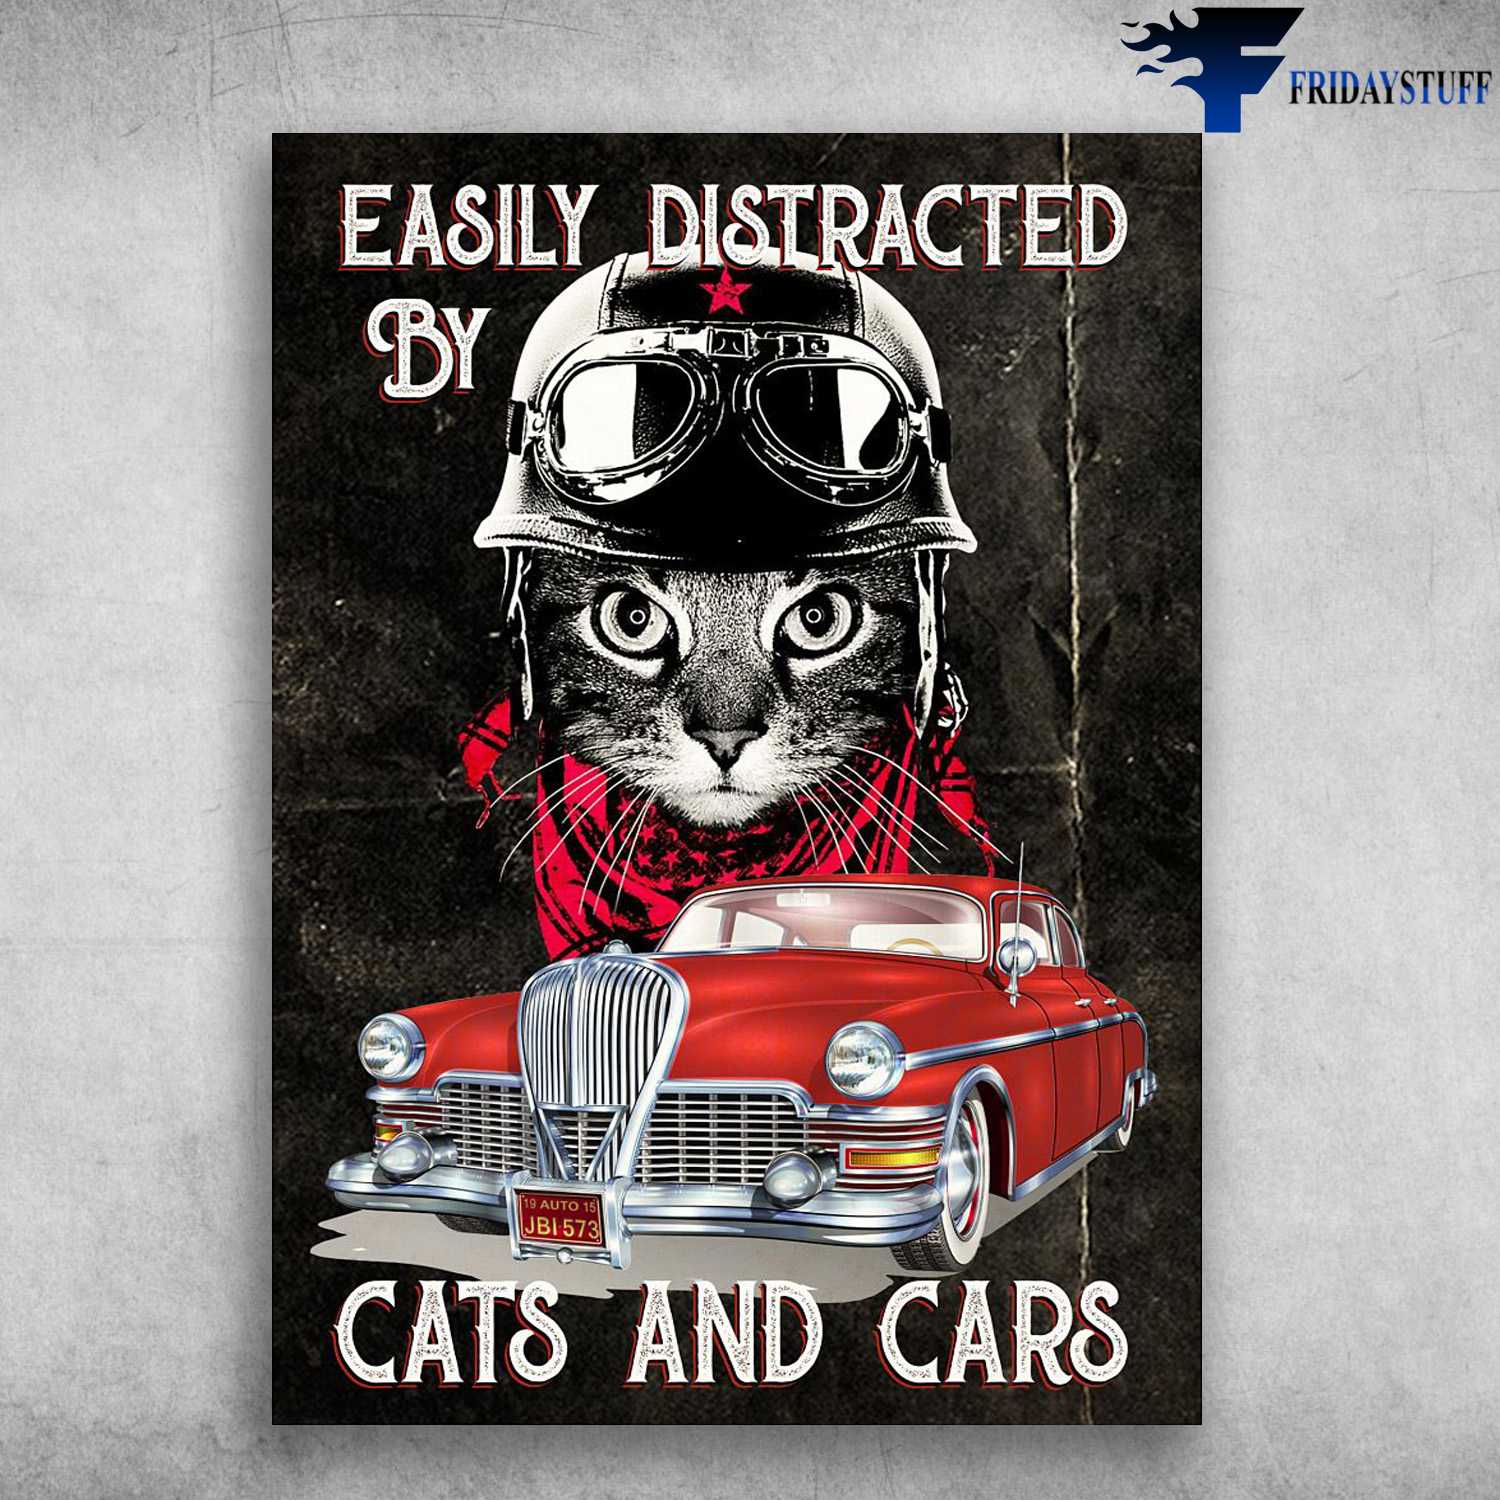 Black Cat Driving - Easily Distracted By, Cats And Cars, Racing Cat